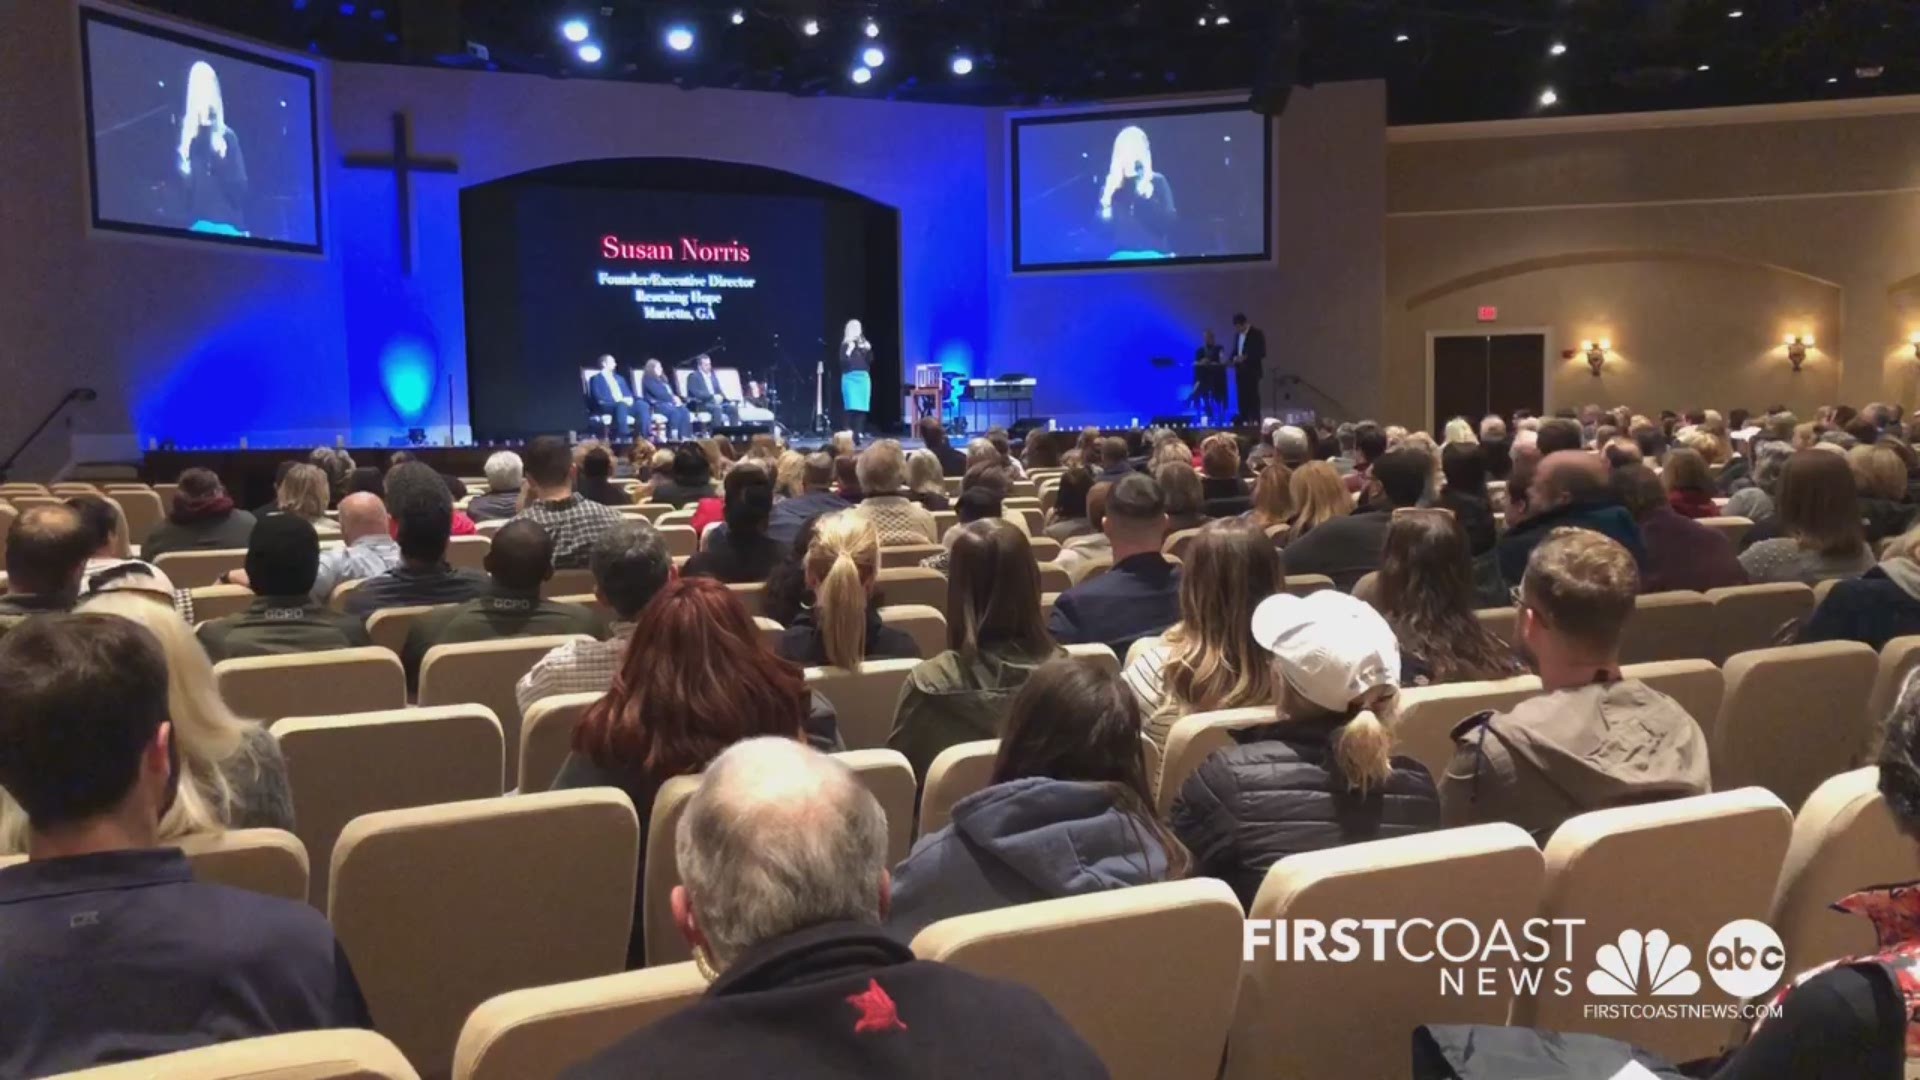 Georgia Human Trafficking Initiative hosts its first forum, titled "Prisoners of Darkness."